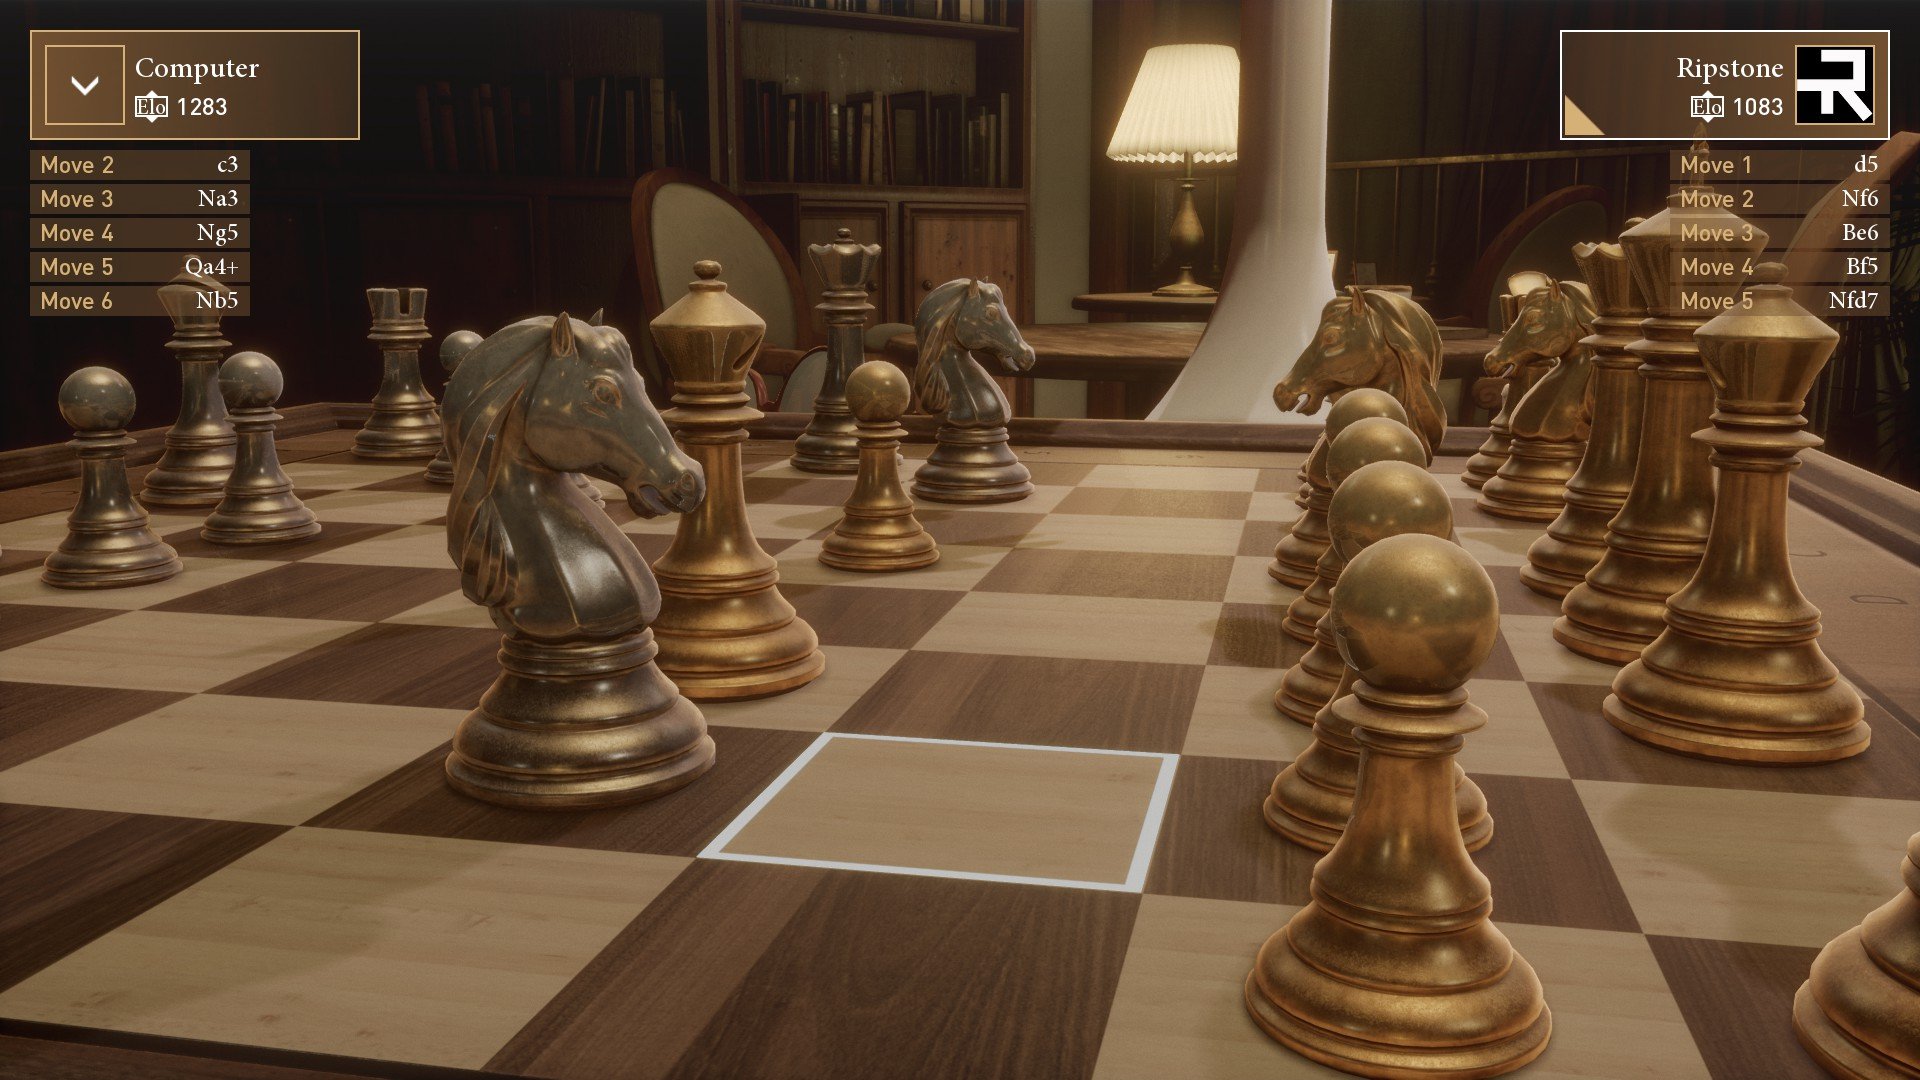 Chess Rush screenshots, images and pictures - Giant Bomb